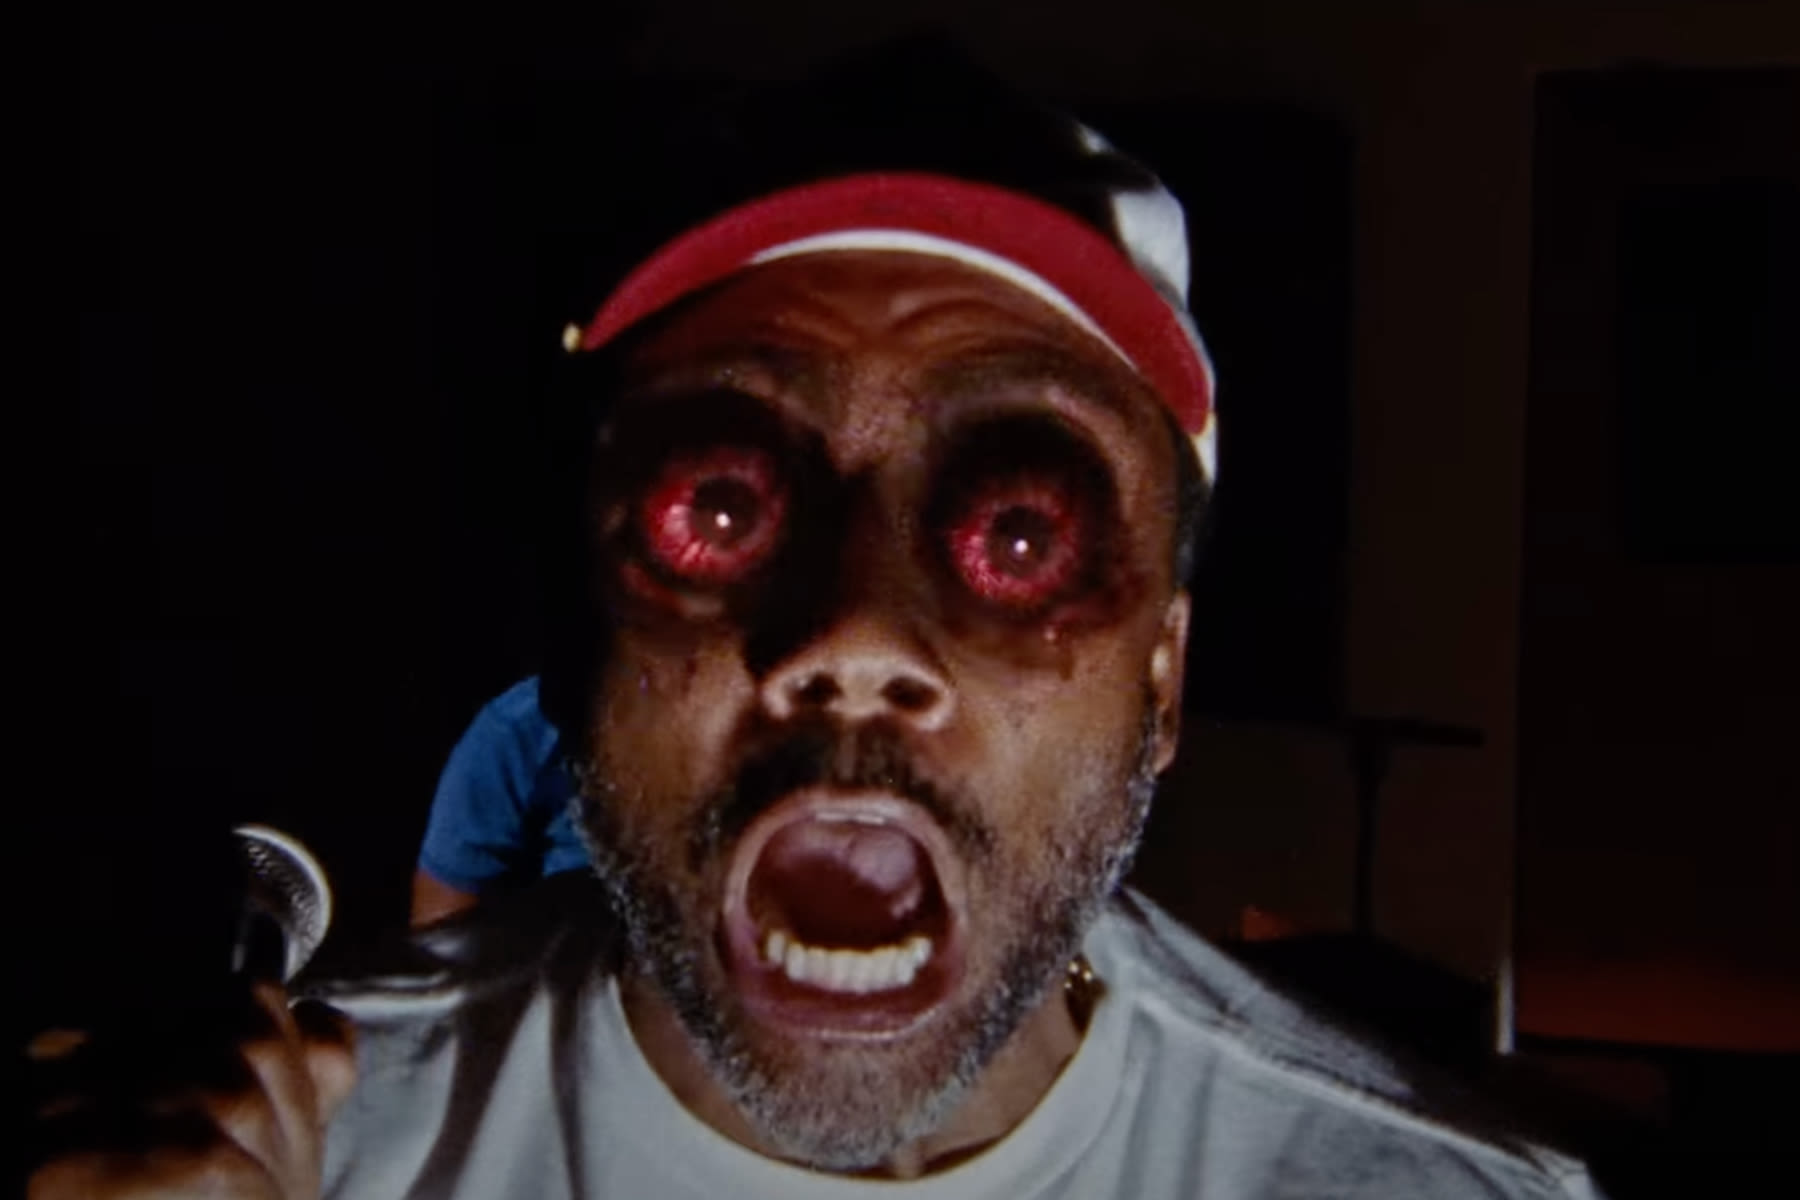 Childish Gambino’s ‘Lithonia’ Video Ends With a Gory Twist